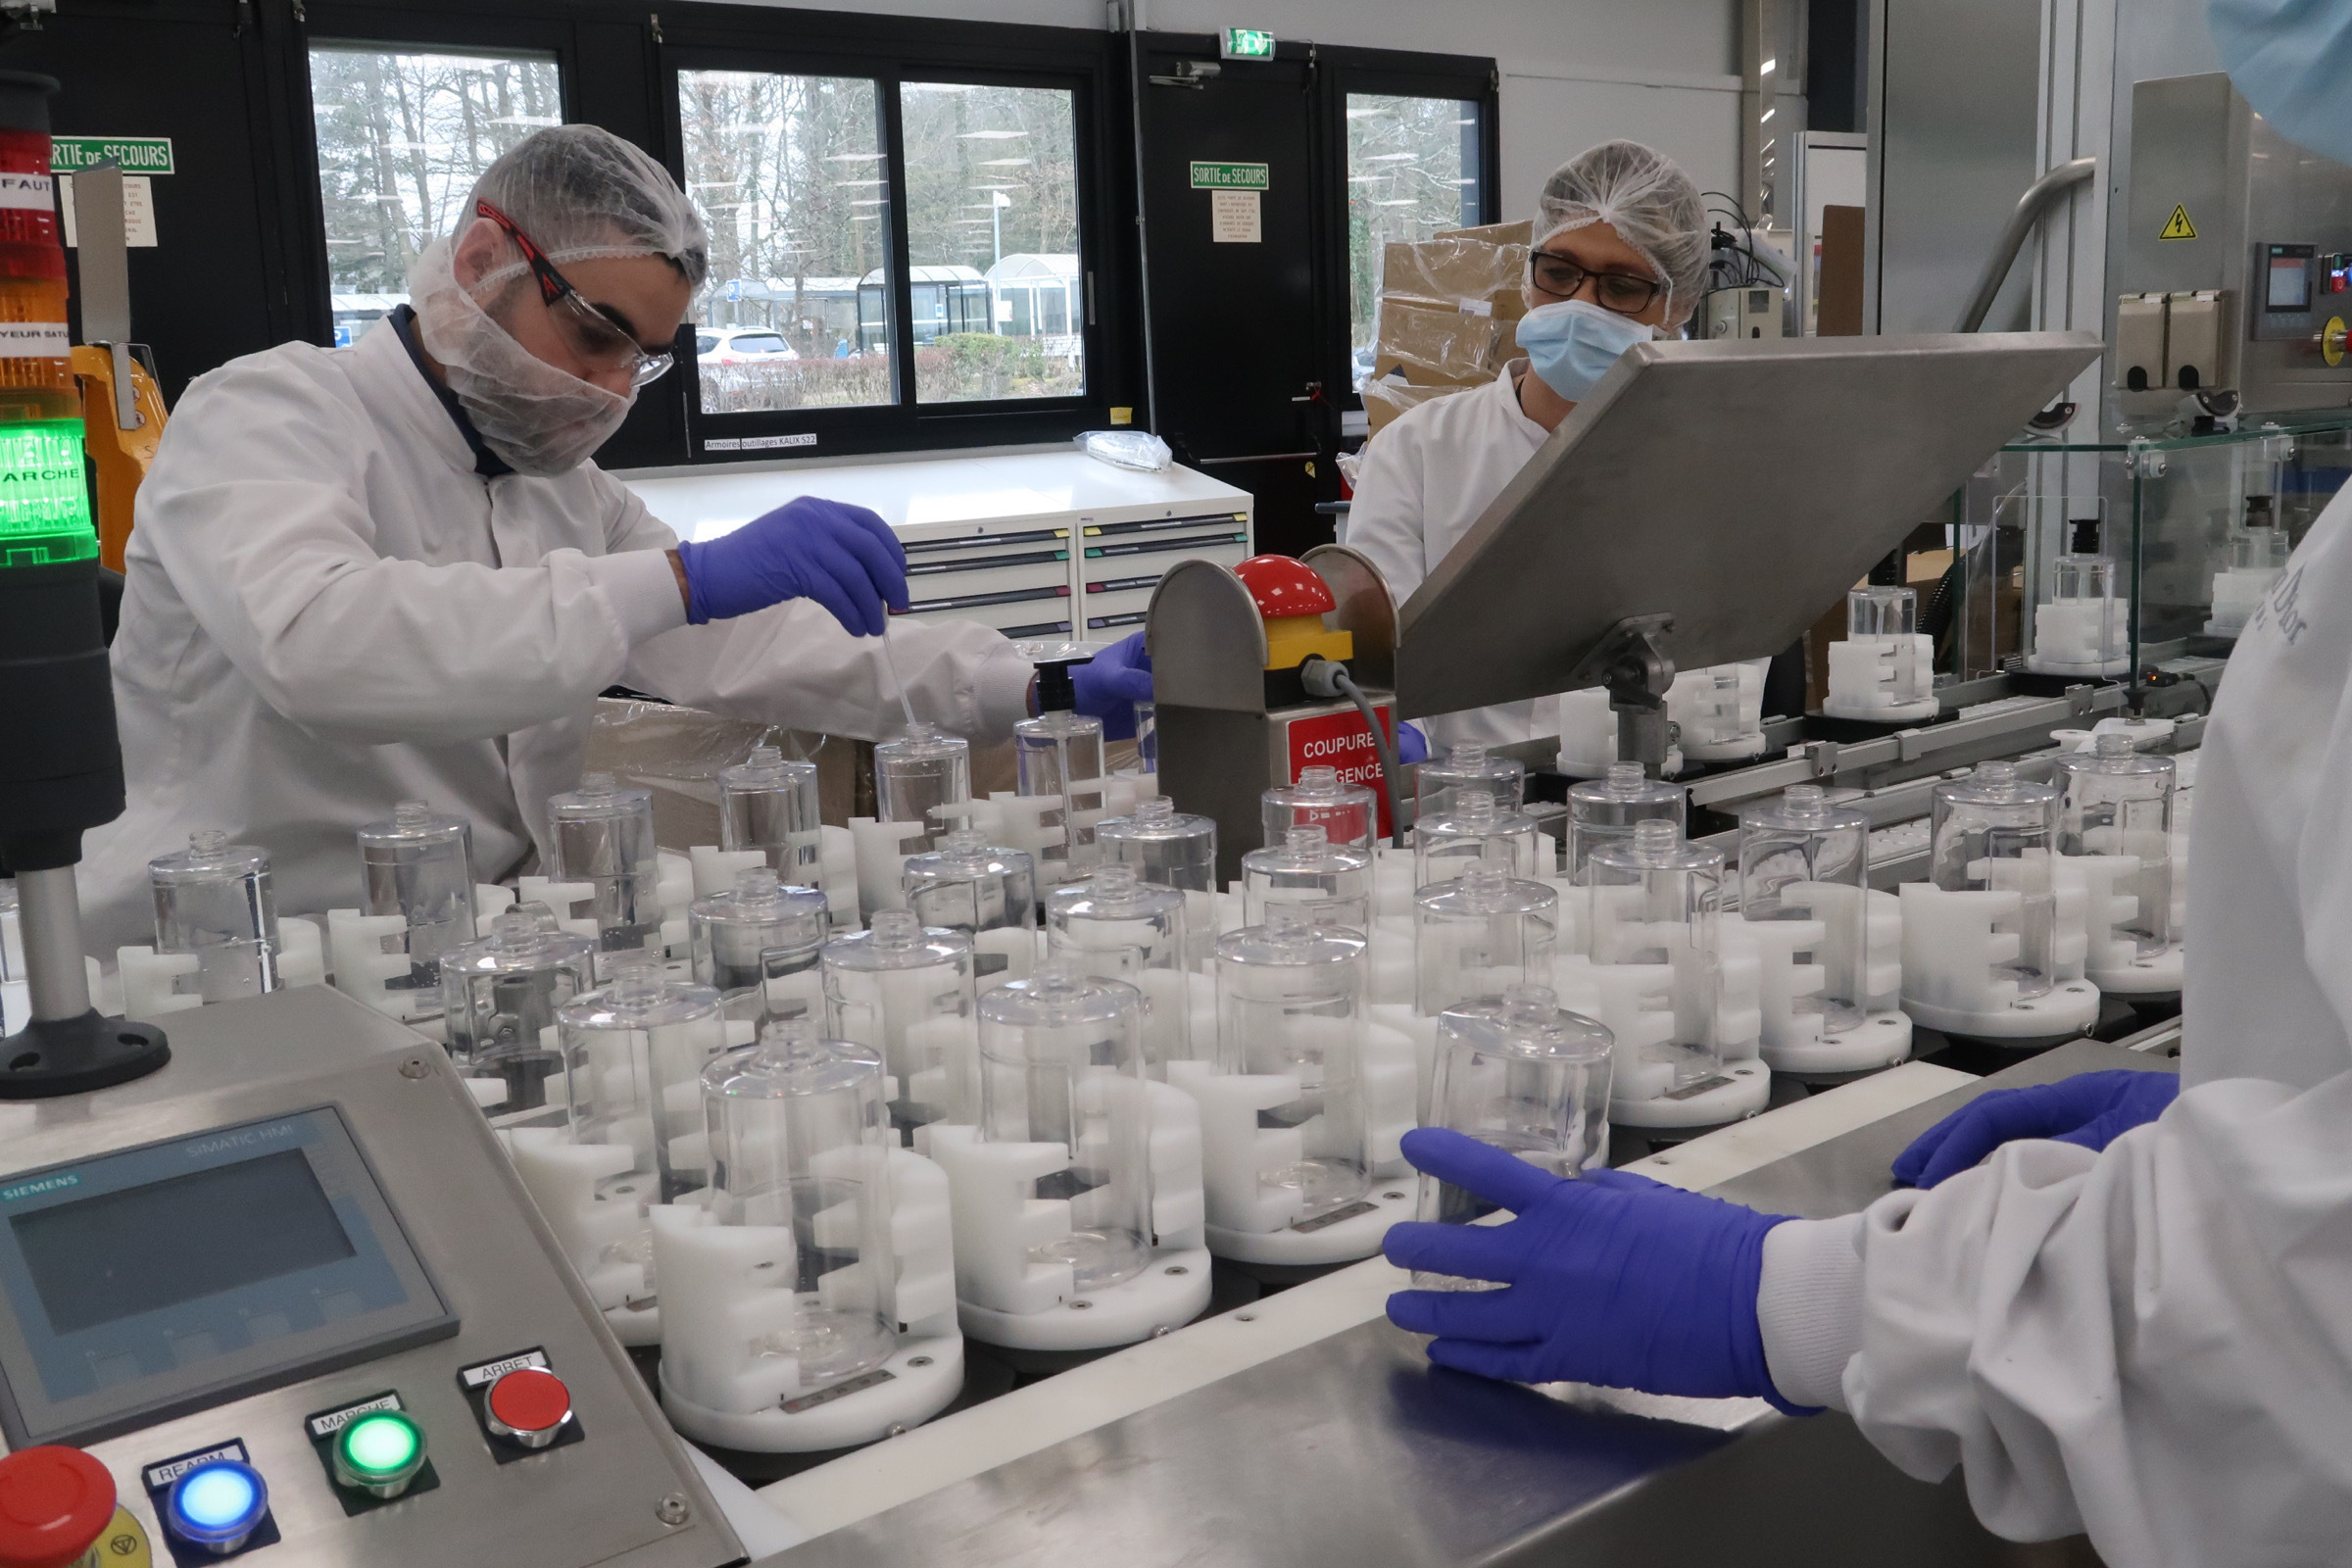 Beauty companies using manufacturing facilities to make hand